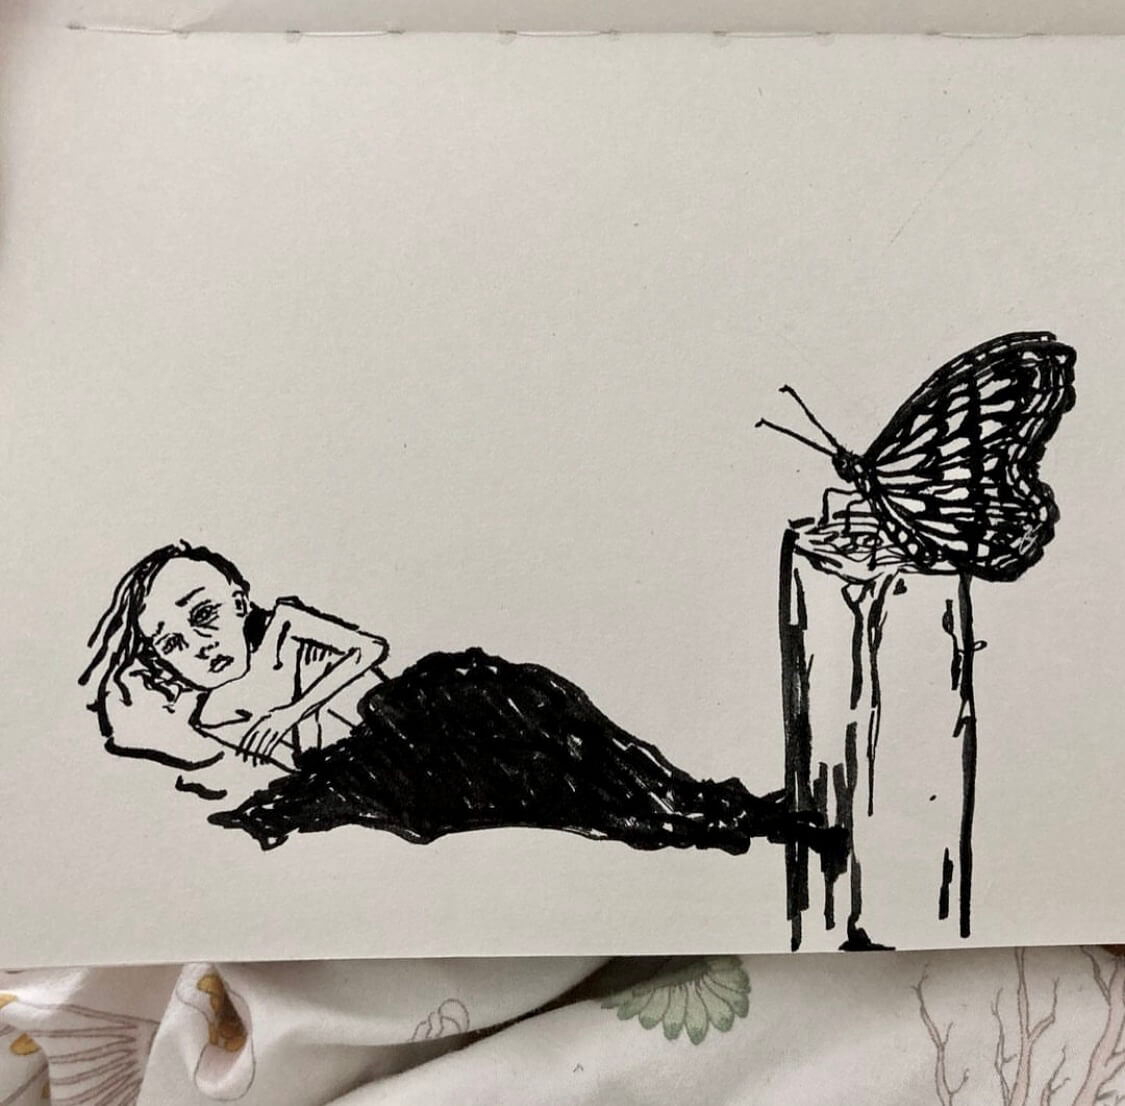 A person in bed with a black butterfly flying over them